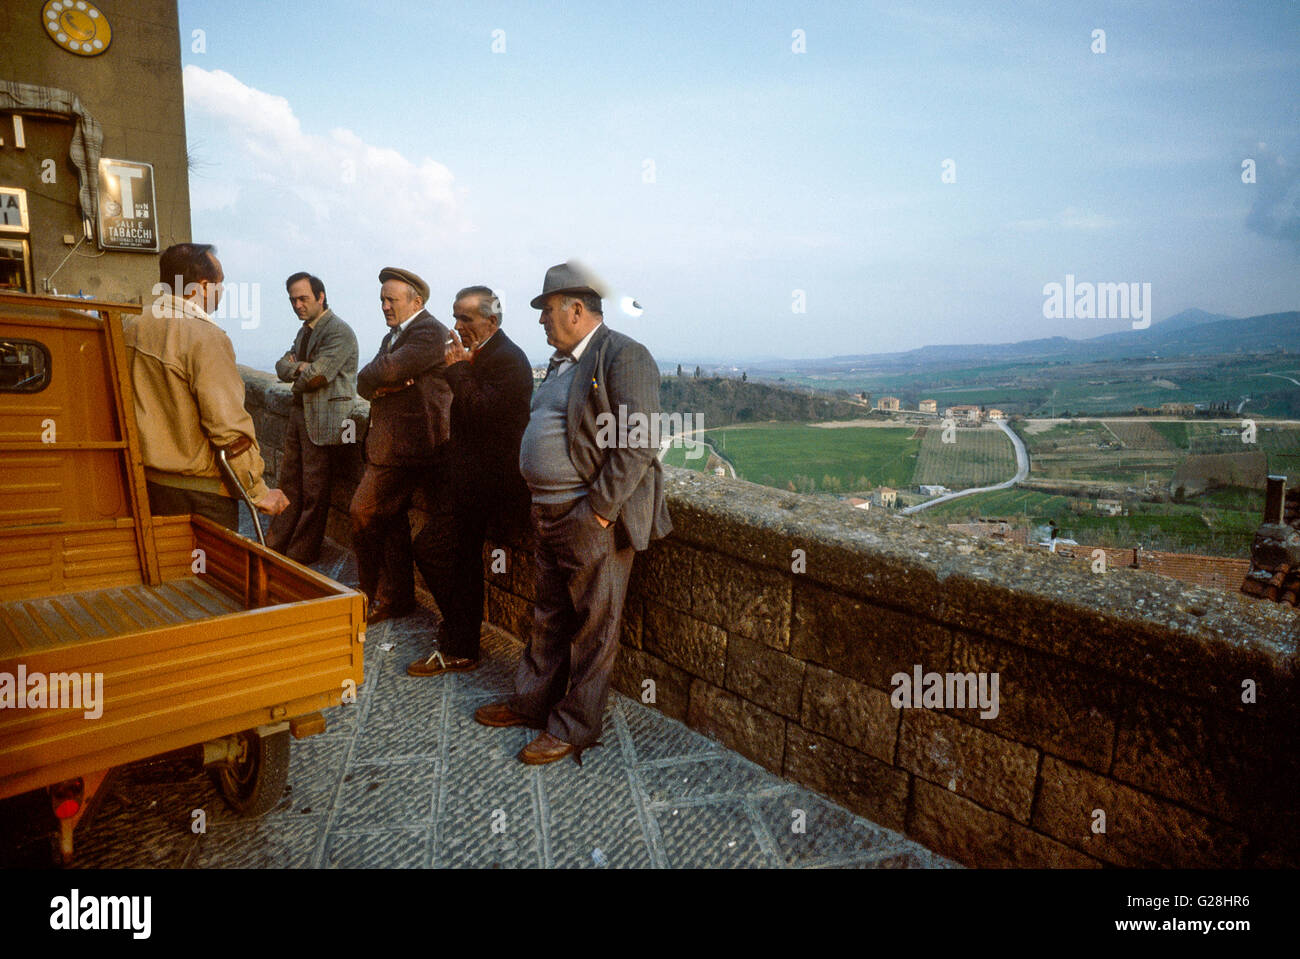 men in the streets of the historic centre of Chianciano, Tuscany, Italy Stock Photo